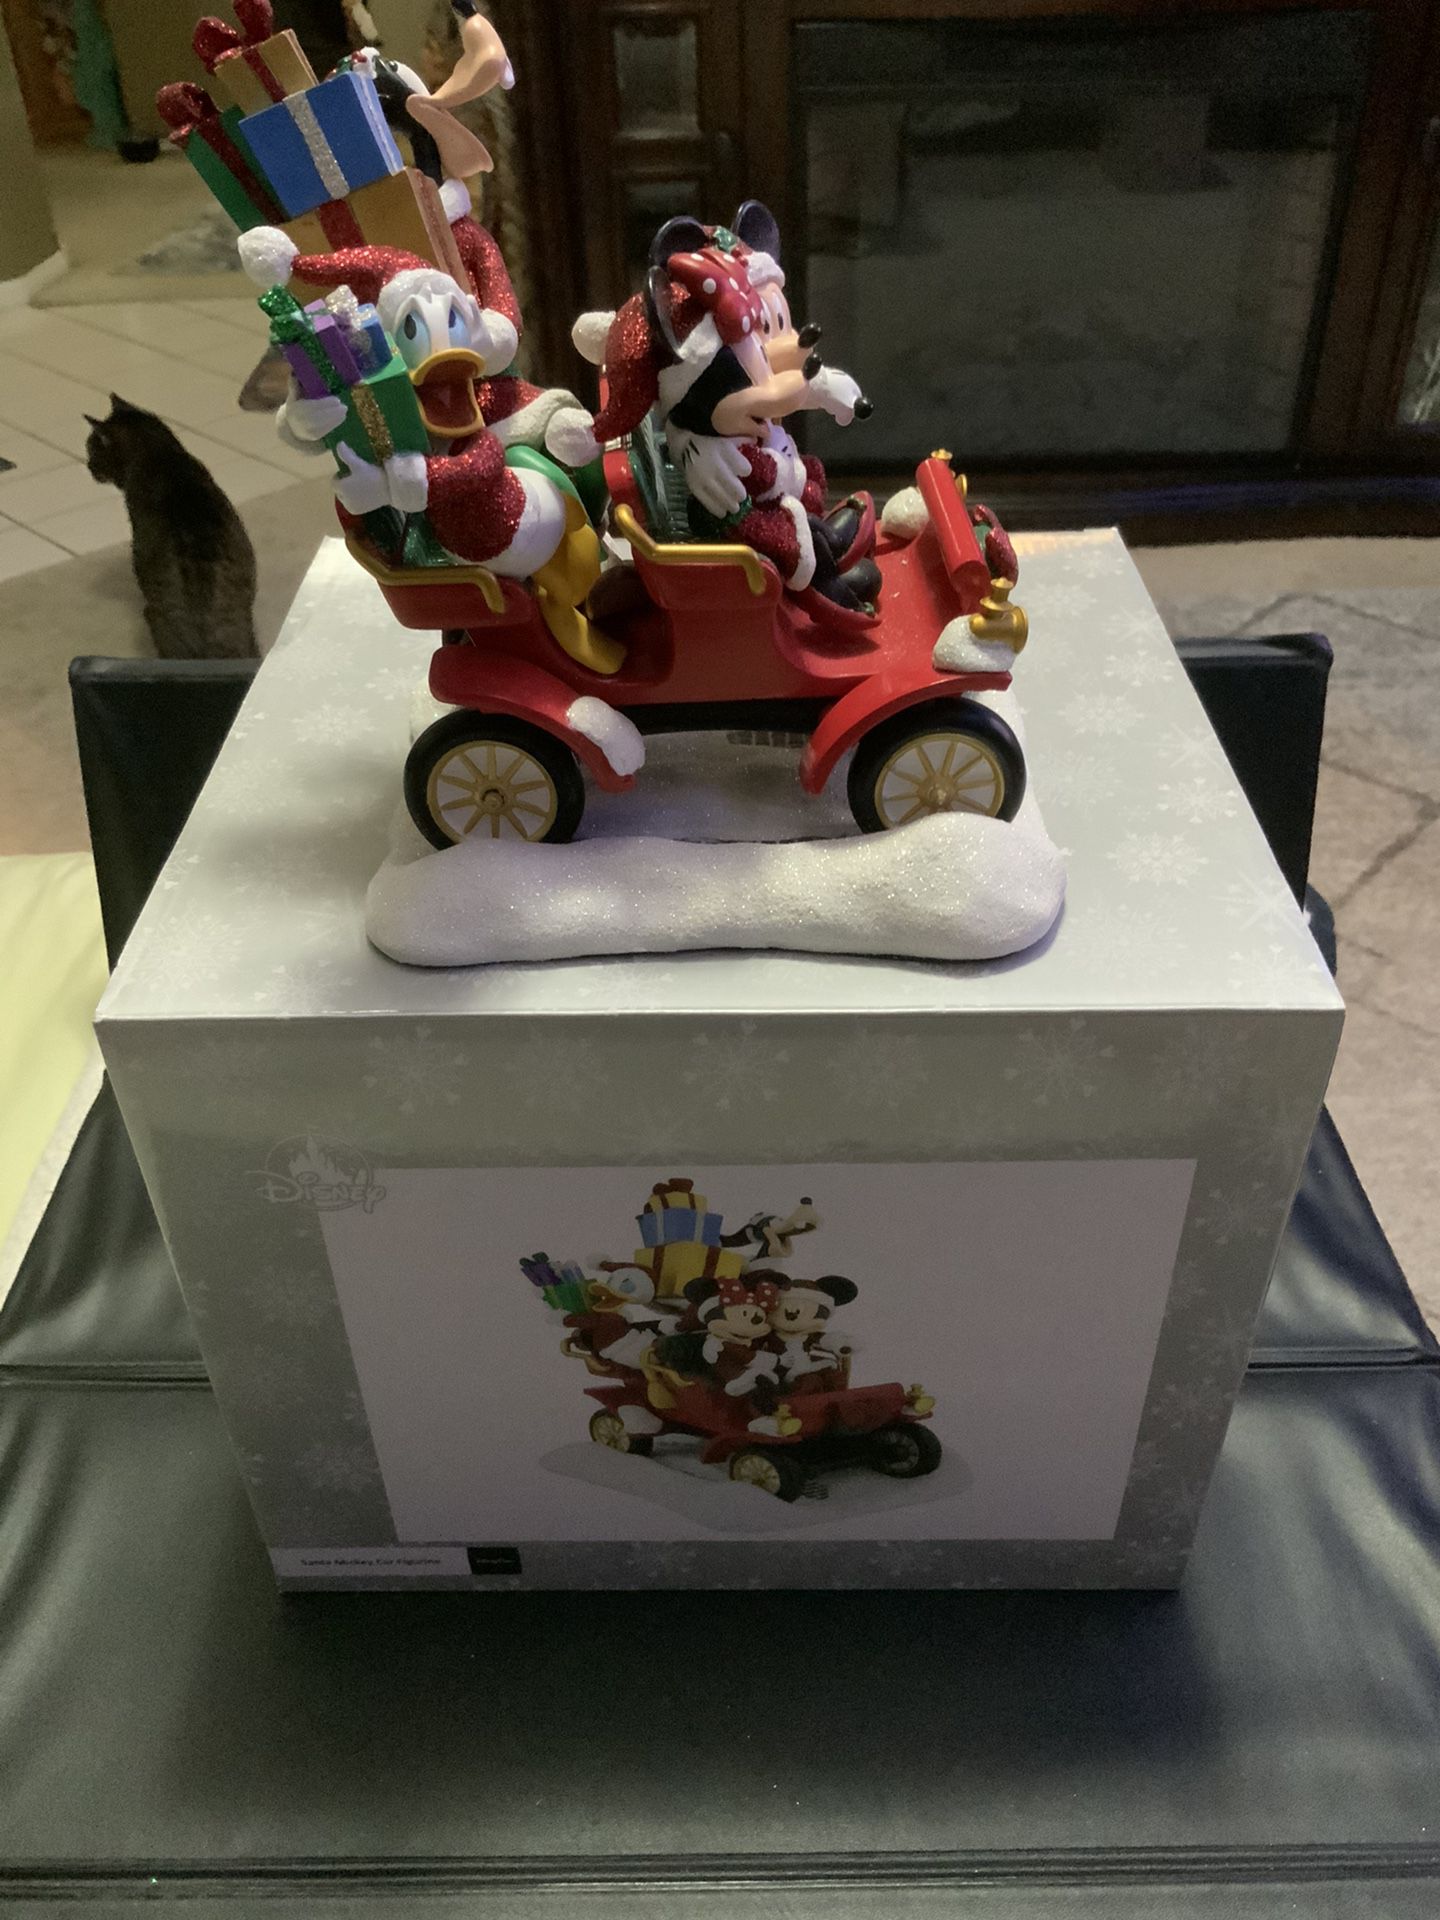 NEW 2017 DISNEY PARKS CHRISTMAS SANTA MICKEY CAR FIGURINE IN ORIGINAL PACKAGING/BOX EXCELLENT CONDITION